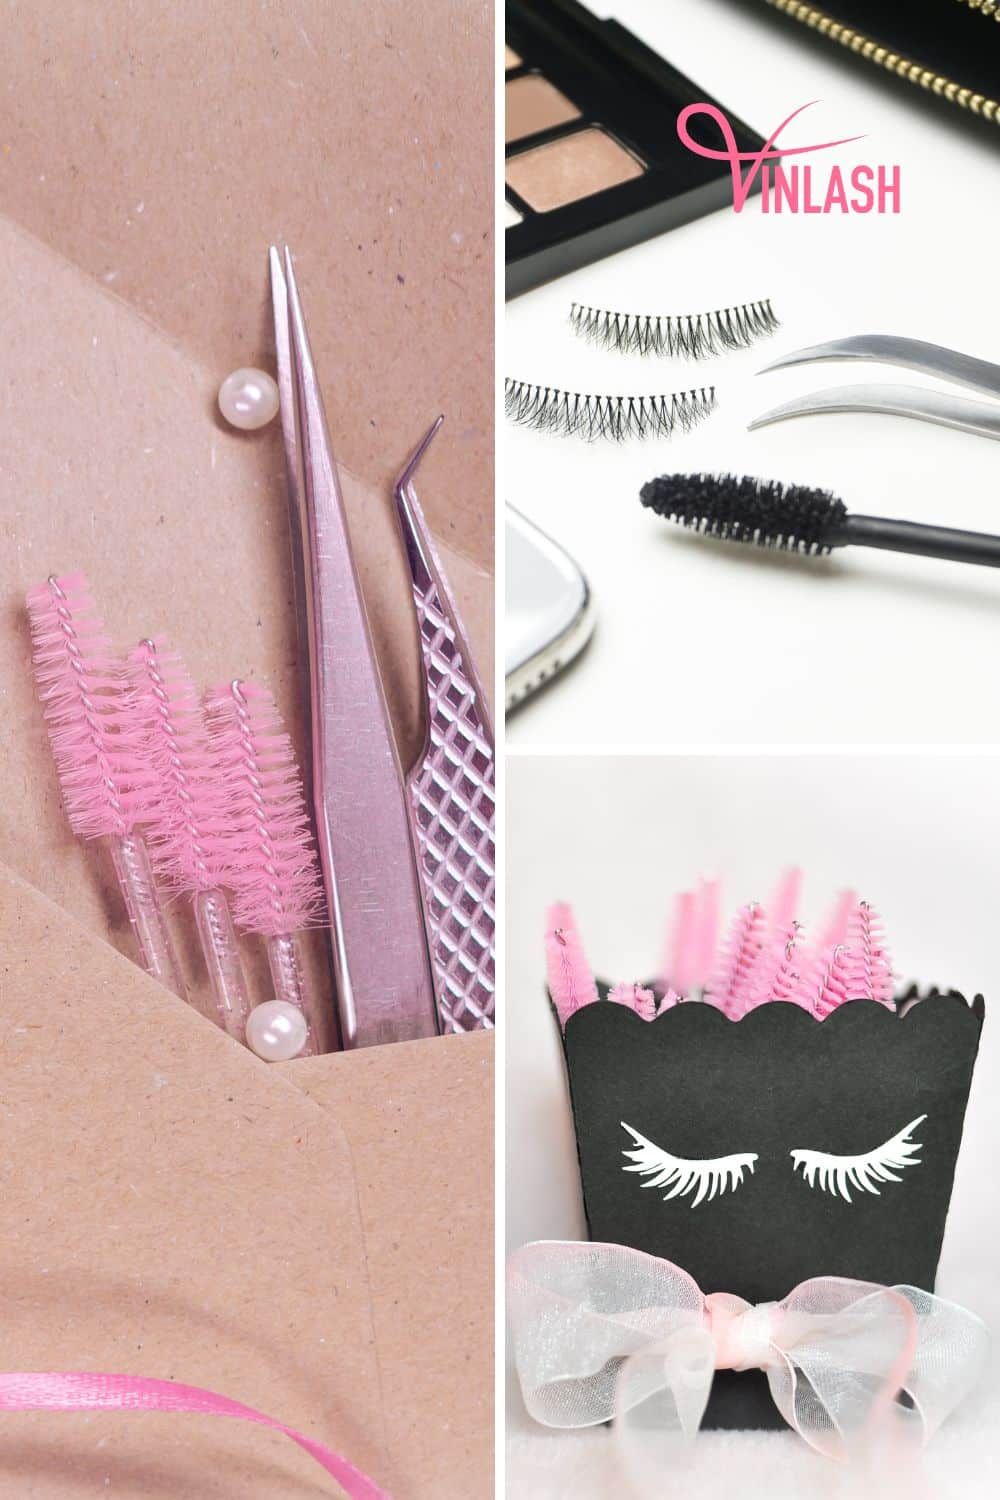 comprehensive-guide-to-choosing-a-lash-packaging-vendor-for-your-lash-business-1